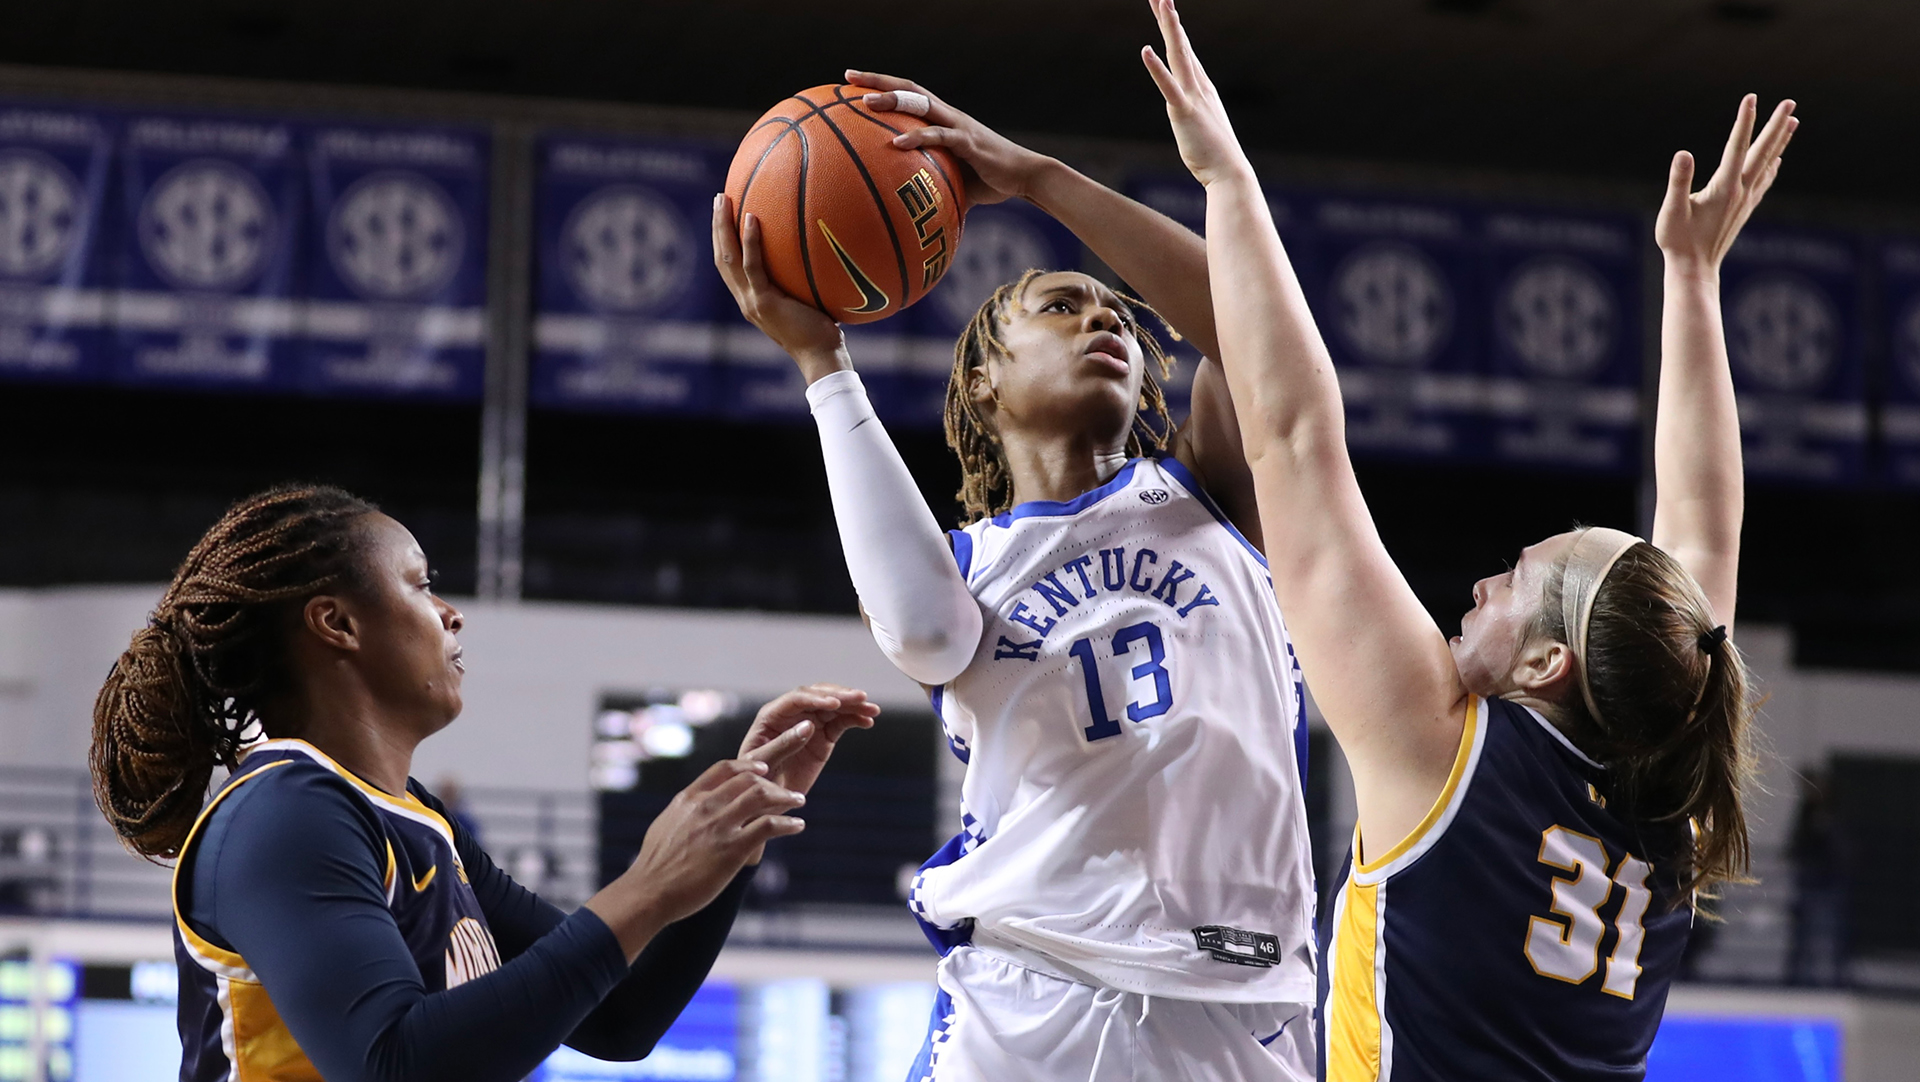 Kentucky Falls to Murray State on Friday